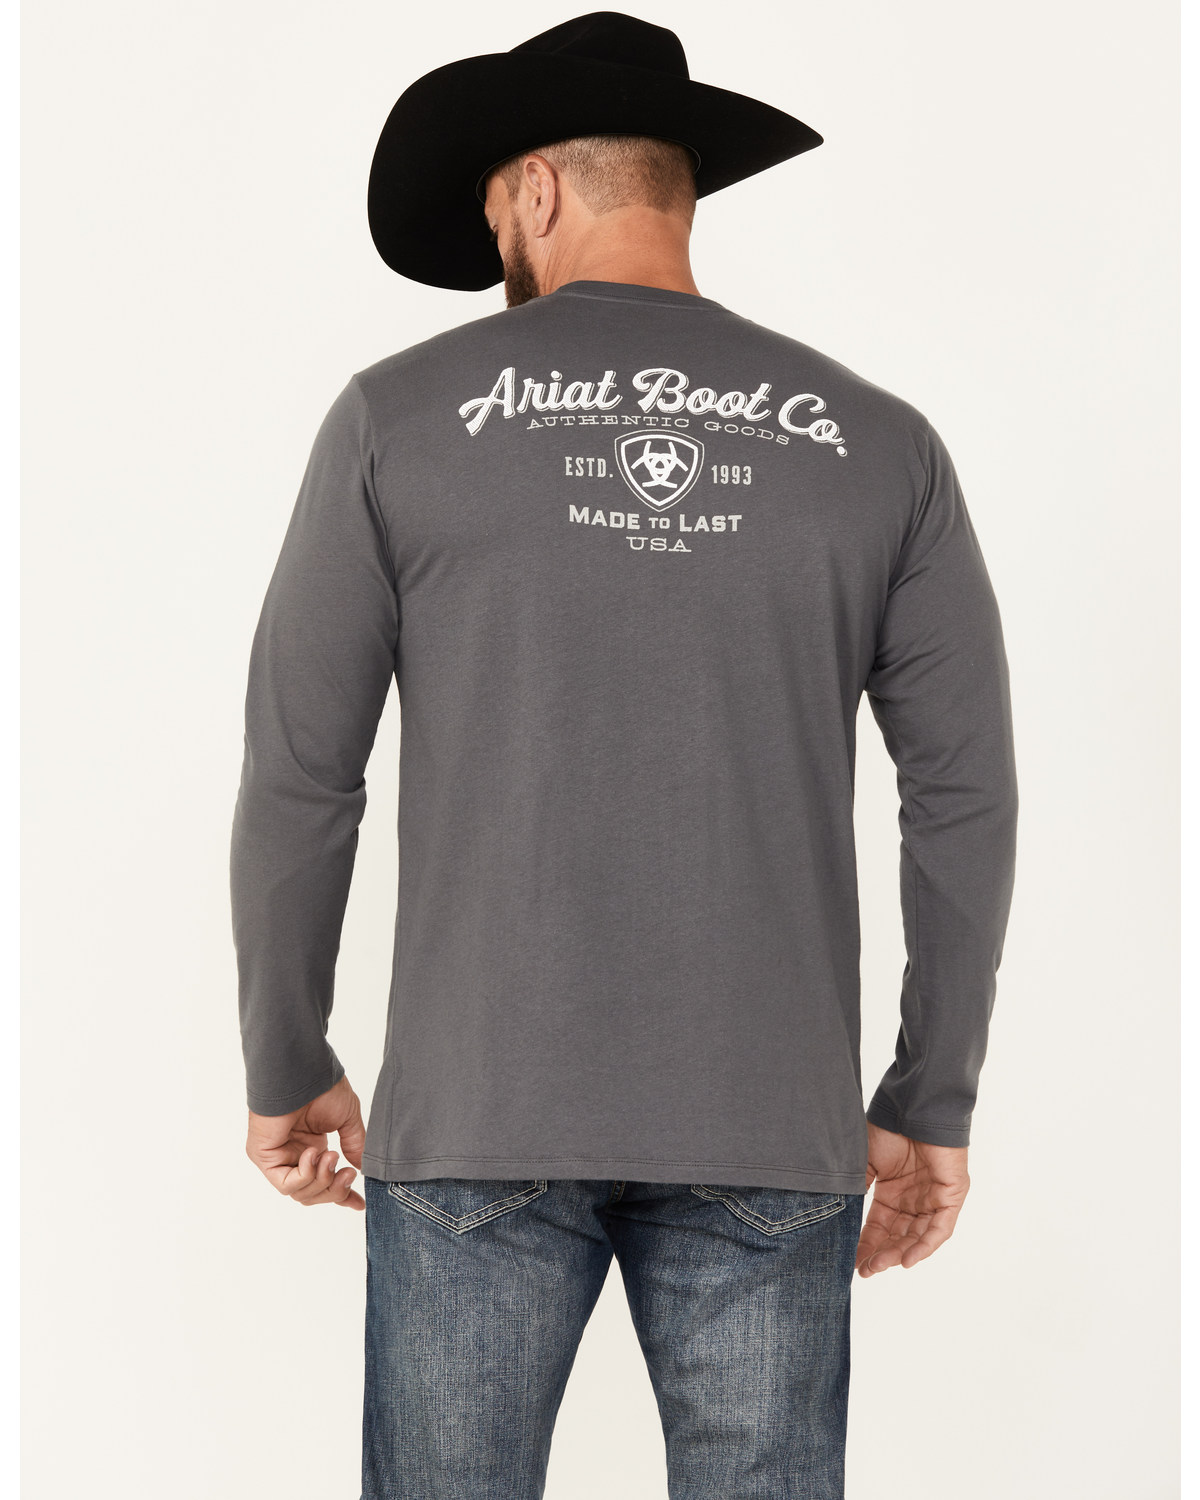 Ariat Men's Boot Barn Exclusive Crest Logo Long Sleeve Graphic T-Shirt